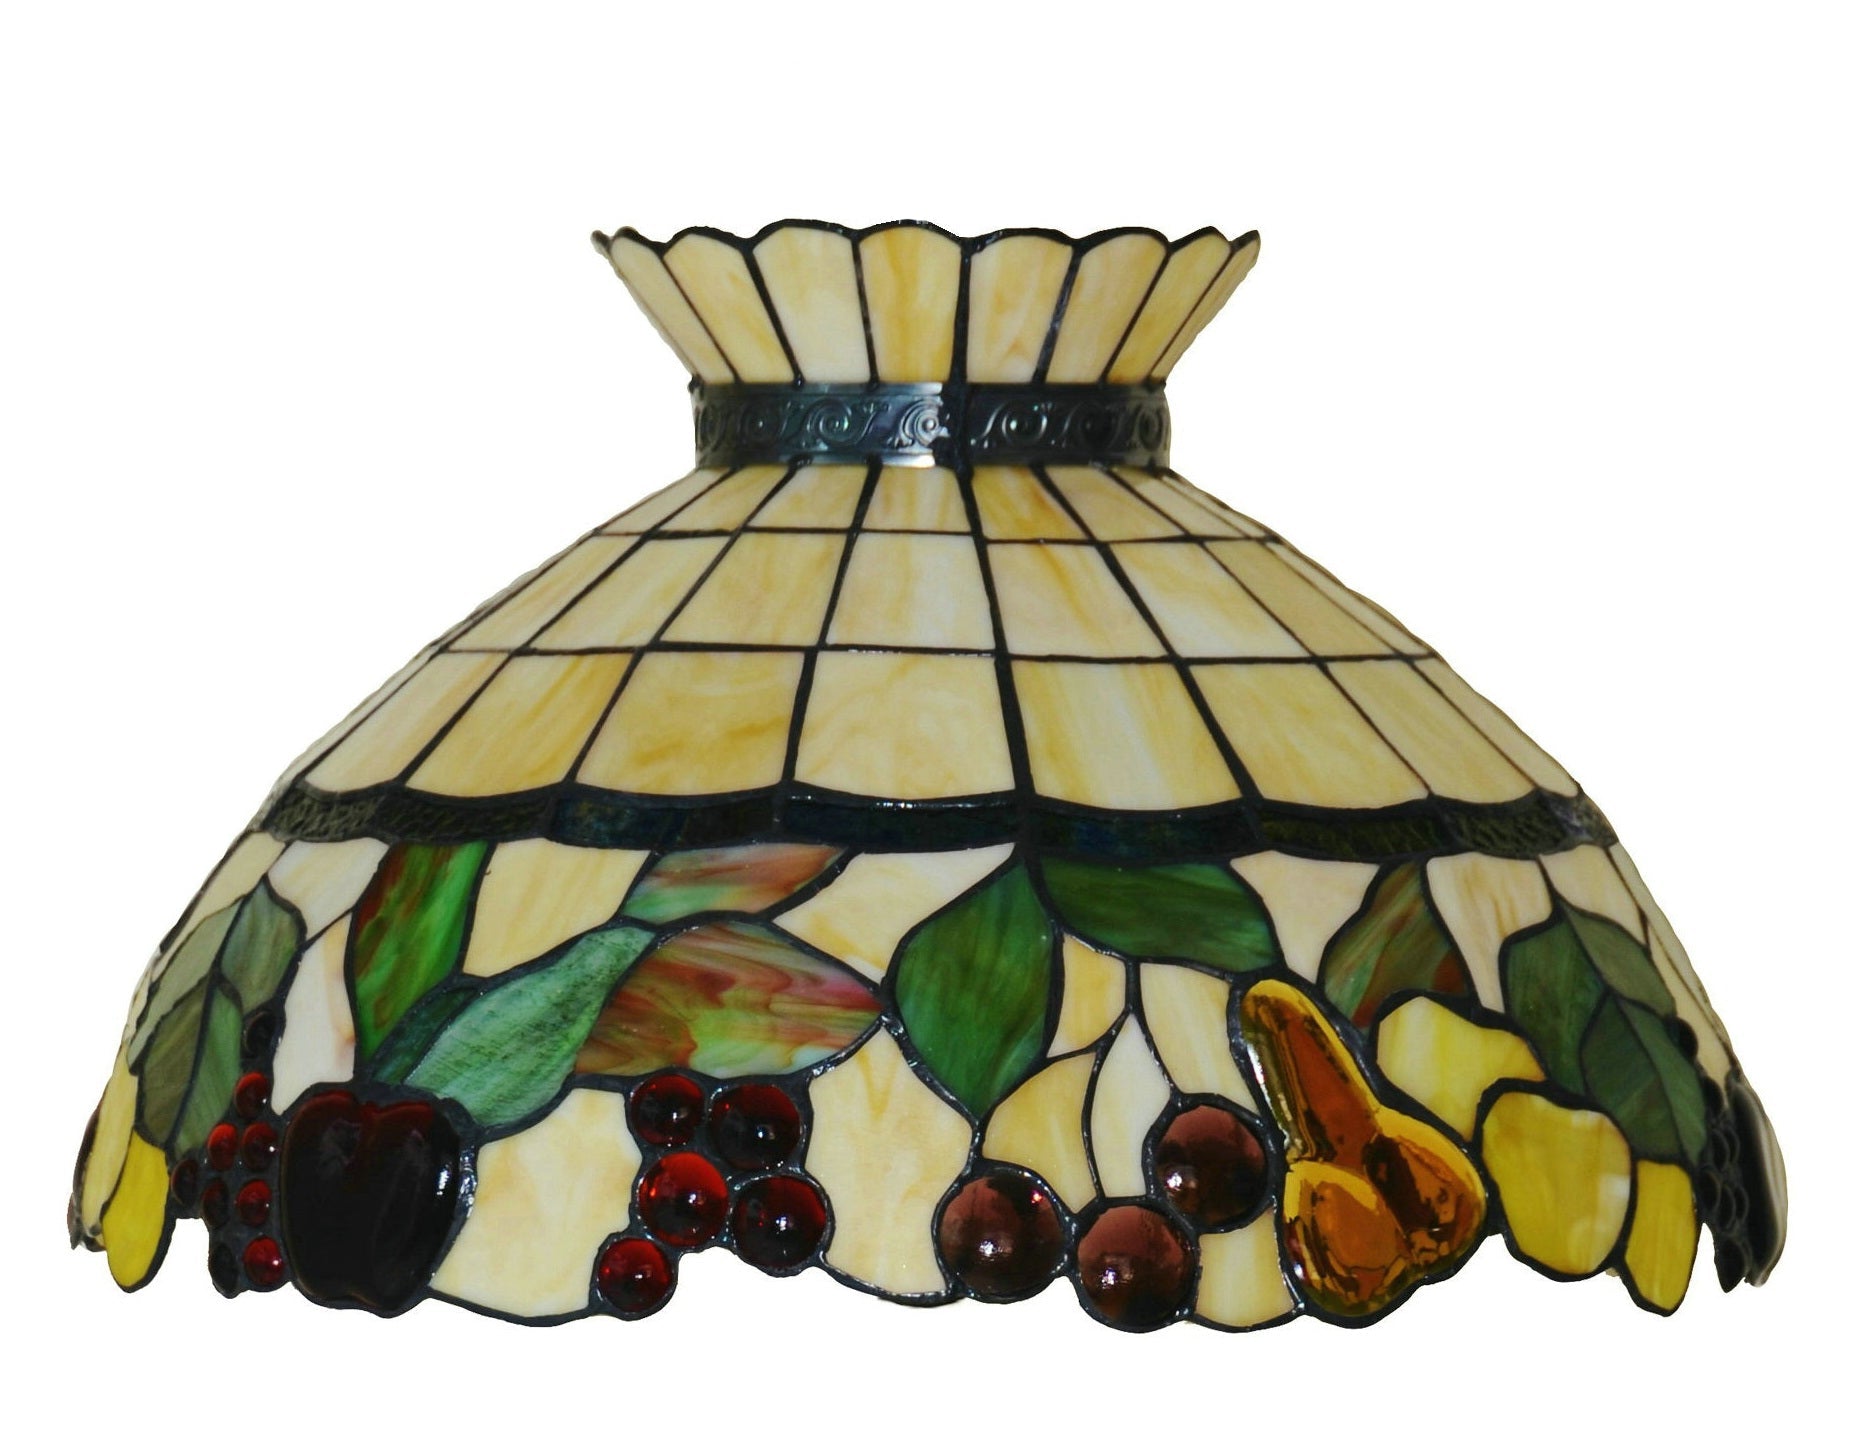 Huge 18" Vintage Fruit Crown Style Table Lamp Tiffany Stained Glass Table Lamps@ Limited Stock only